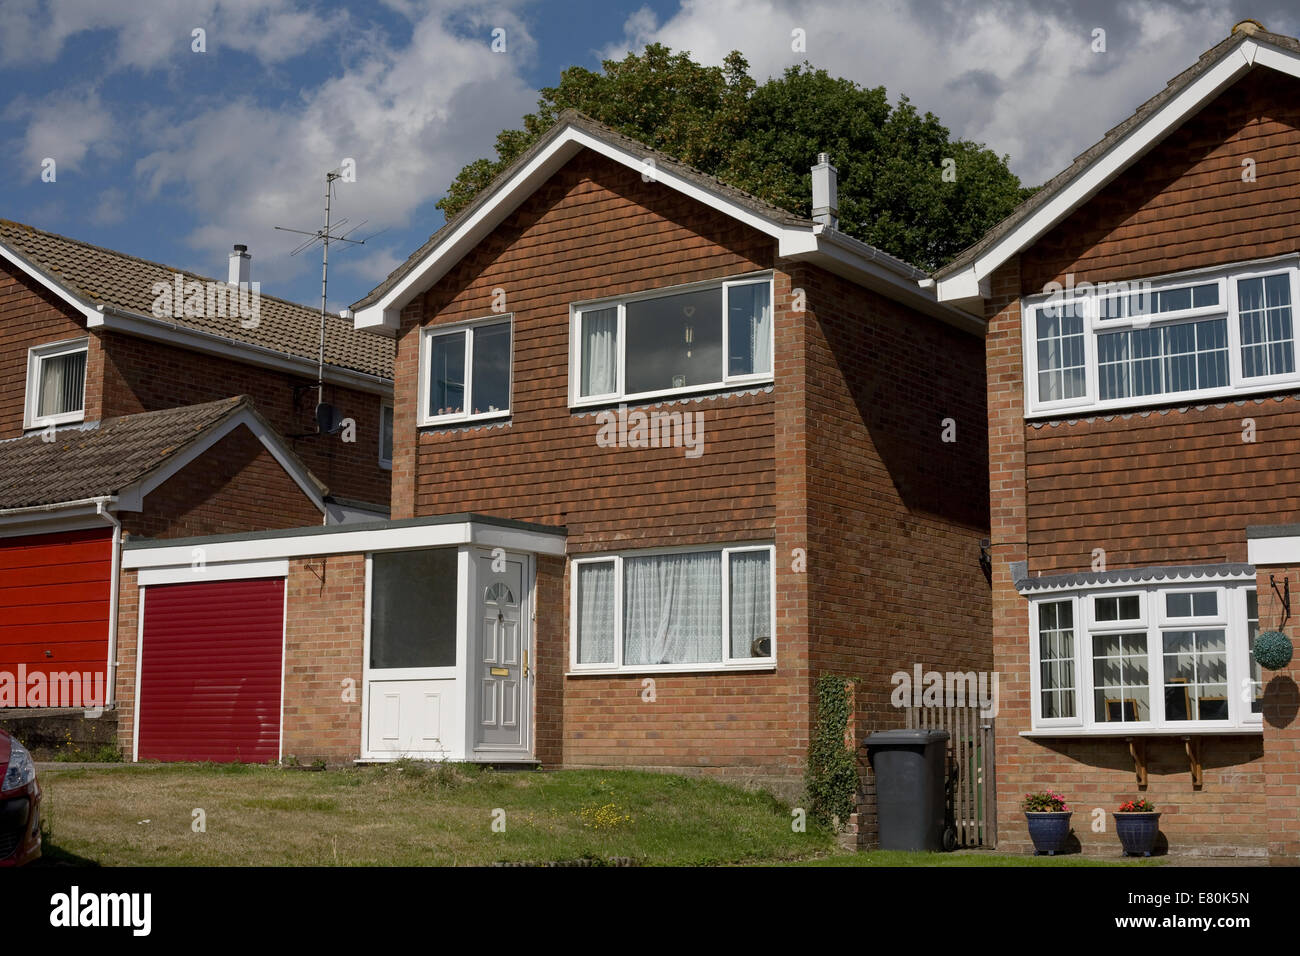 1970s detached houses in Wickham close Tadley Hampshire with double glazed windows, front porch and single garage Stock Photo